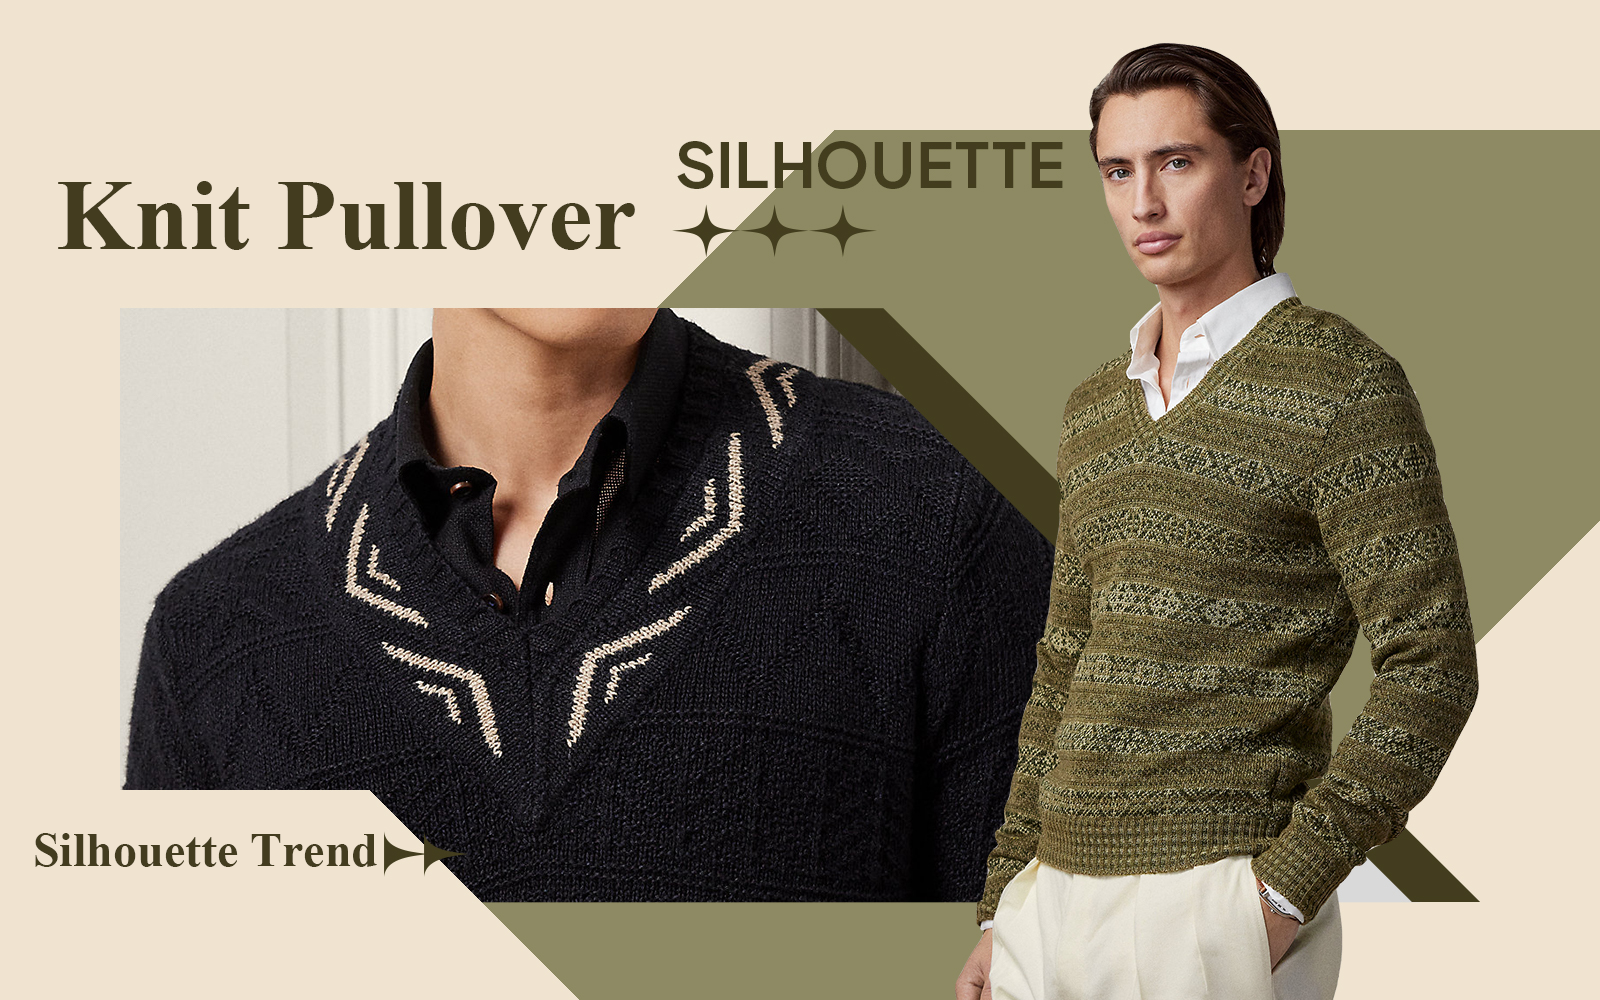 A/W 24/25 Silhouette Trend for Men's Knit Pullover